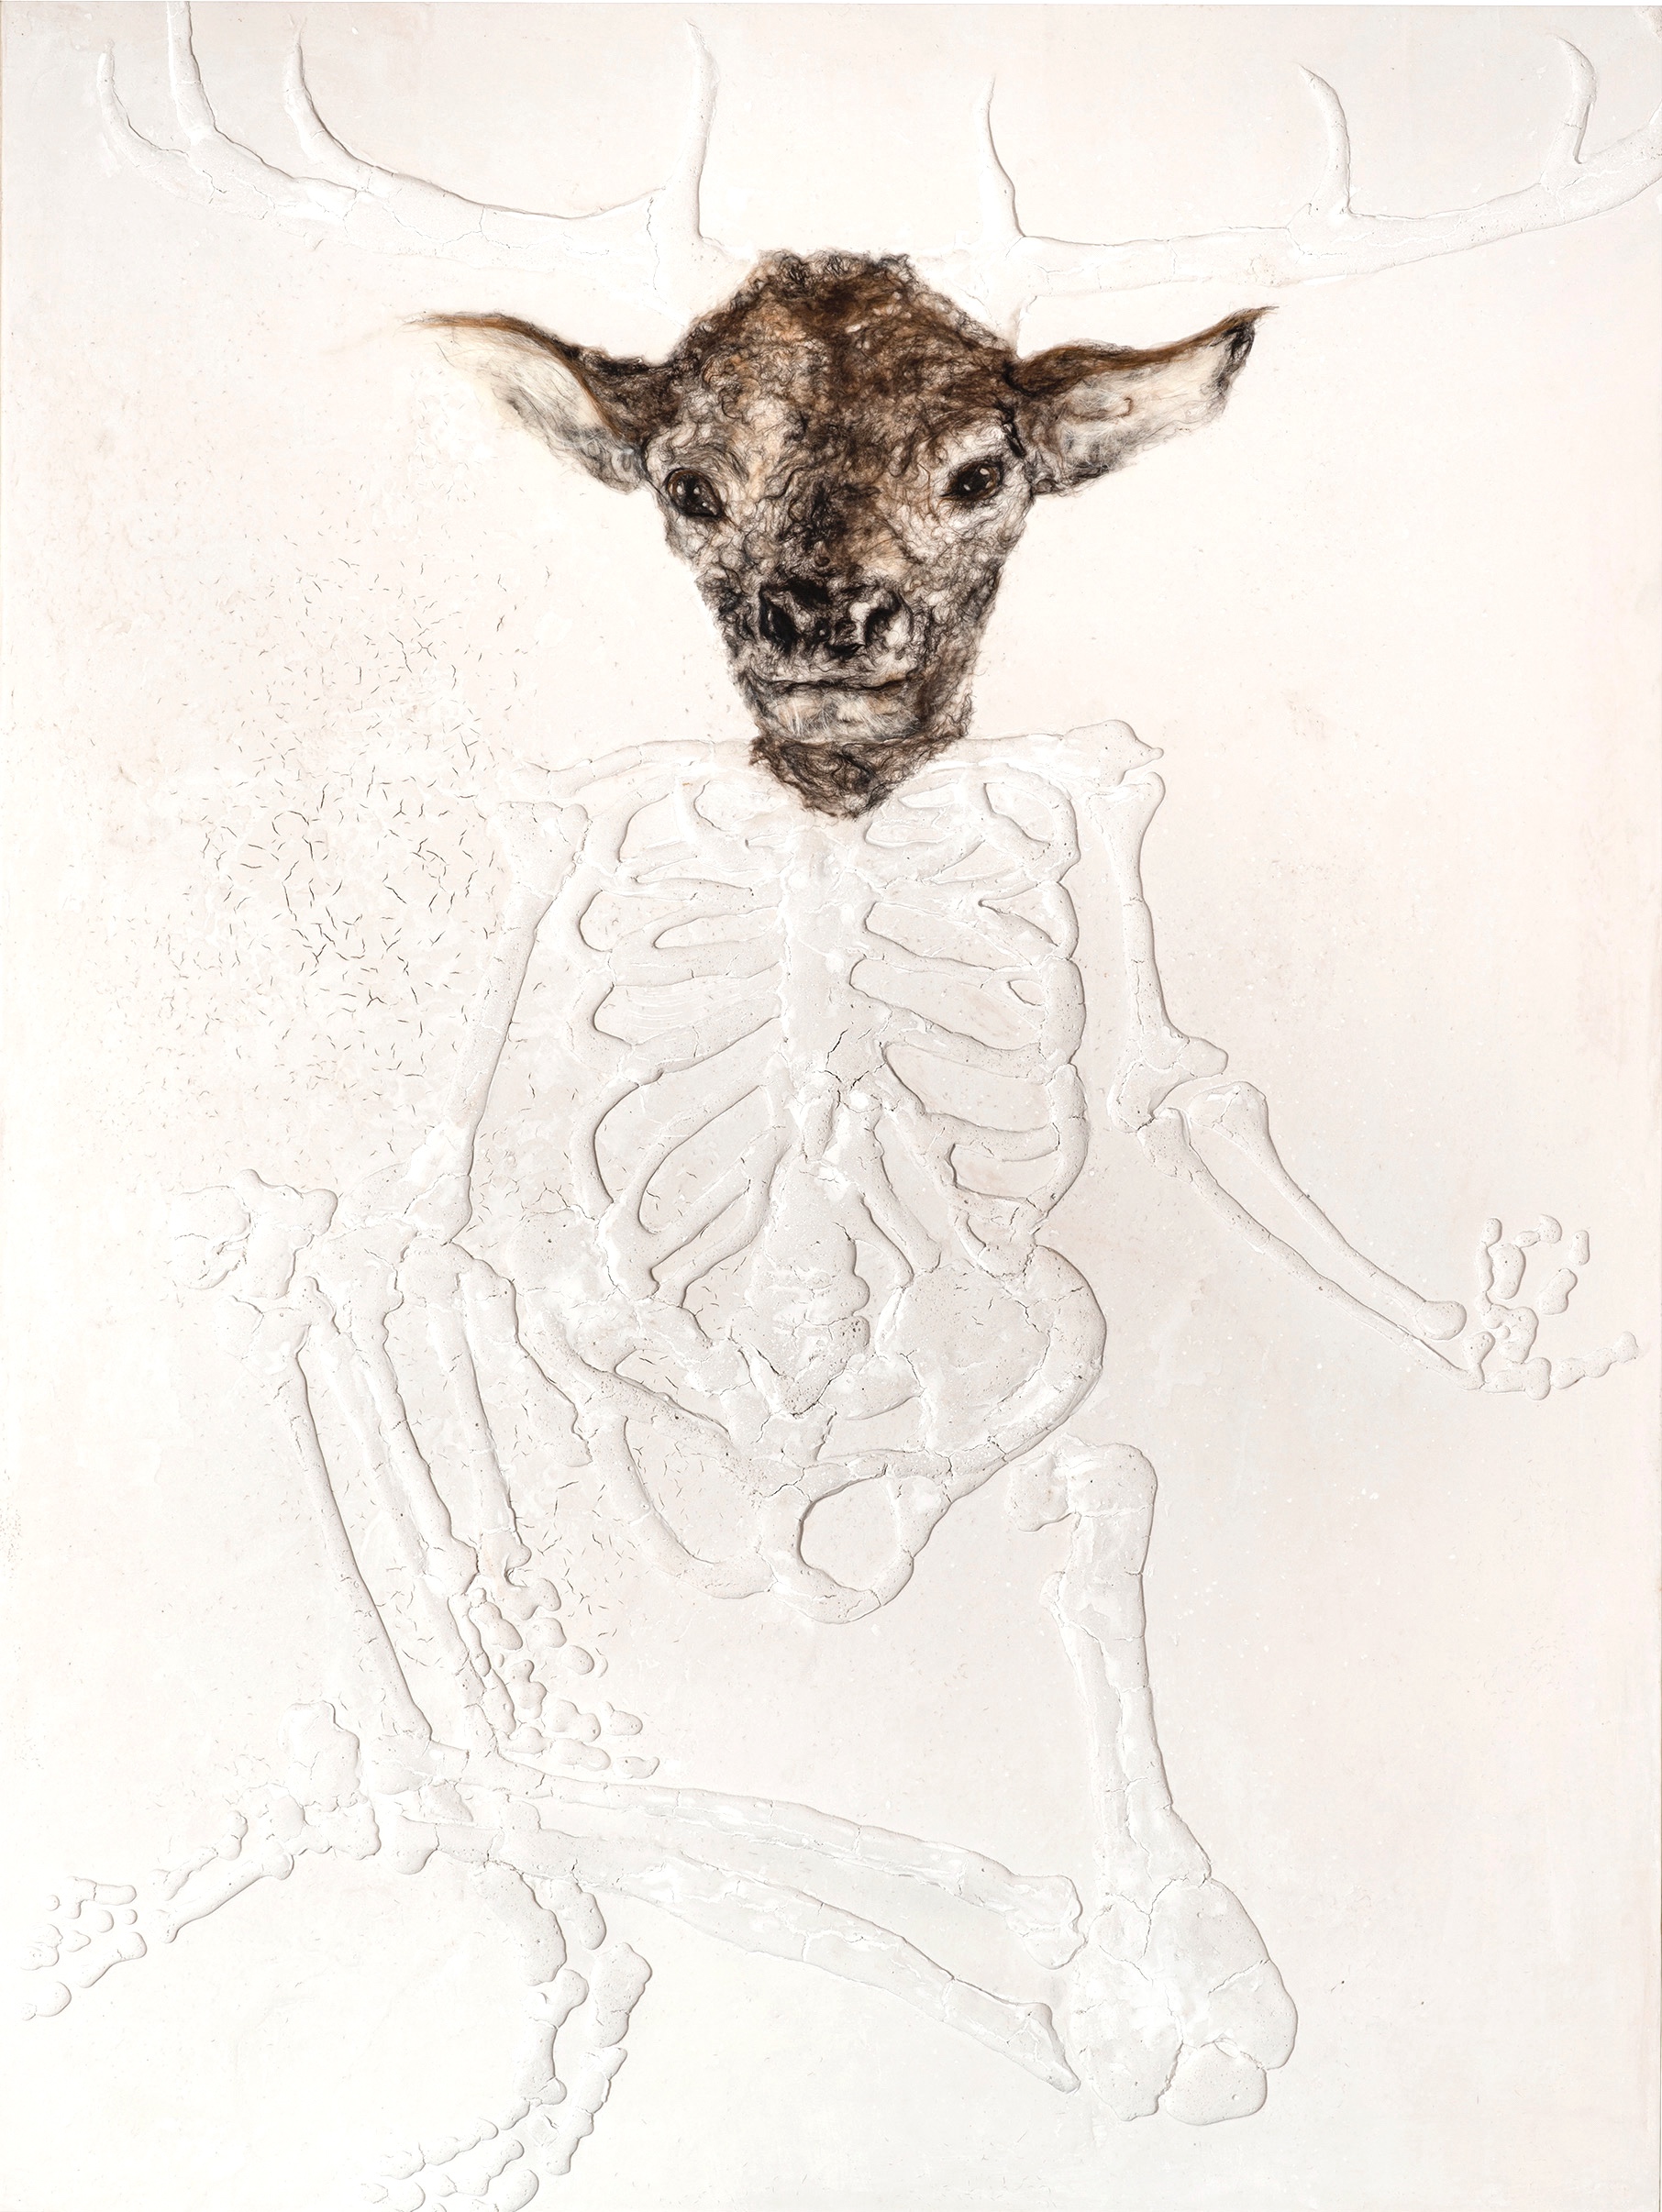 A drawing of a baby cow with its head stuck in the skeleton.